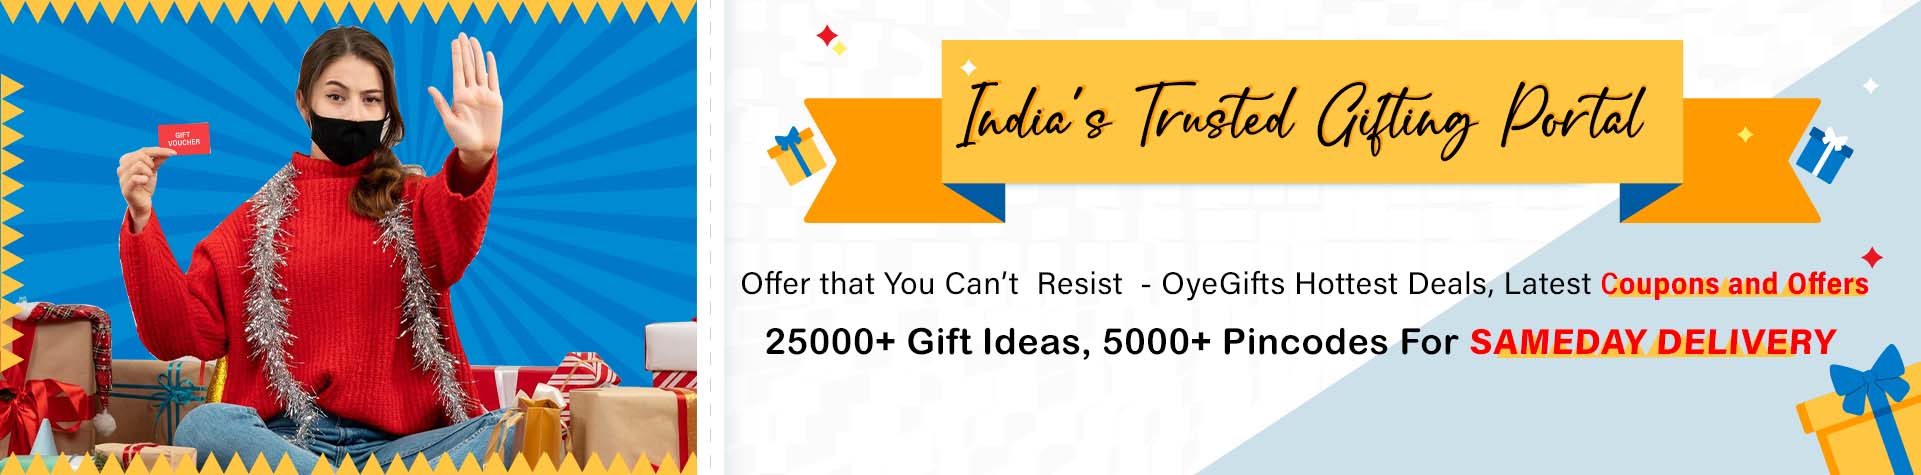 OyeGifts Coupons and Deals Online